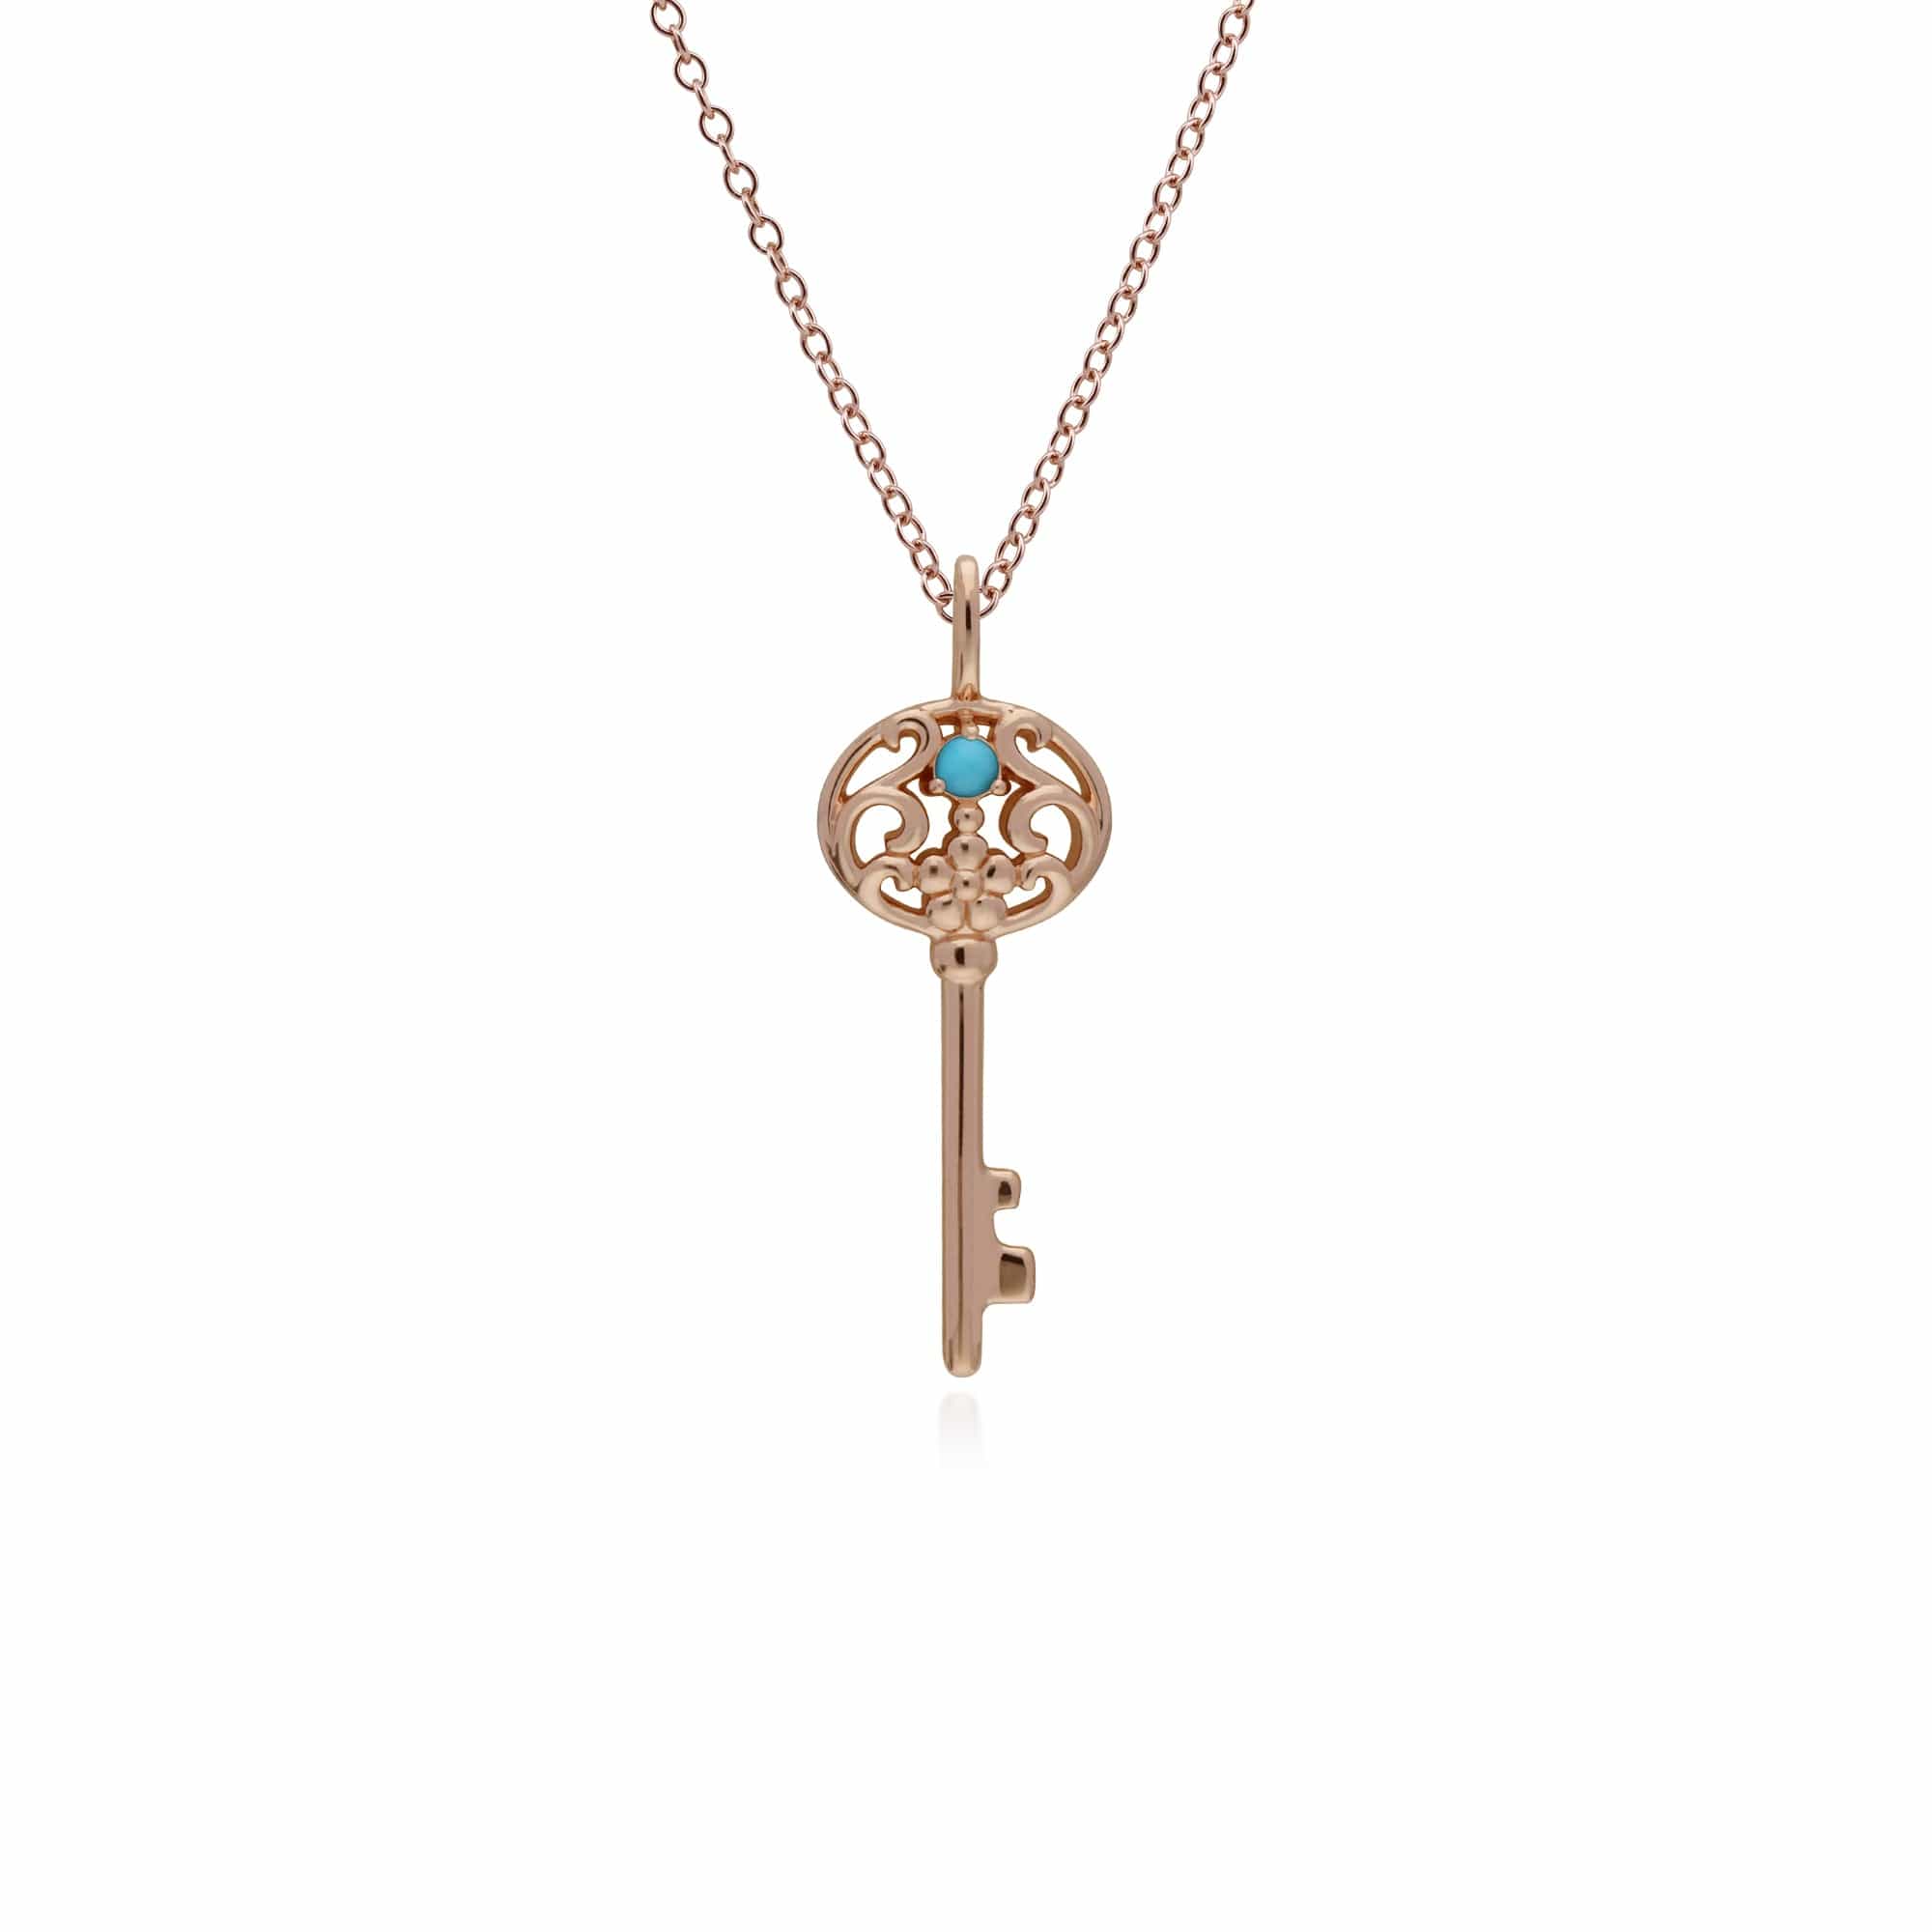 270P026714925-270P026501925 Classic Swirl Heart Lock Pendant & Turquoise Big Key Charm in Rose Gold Plated 925 Sterling Silver 2